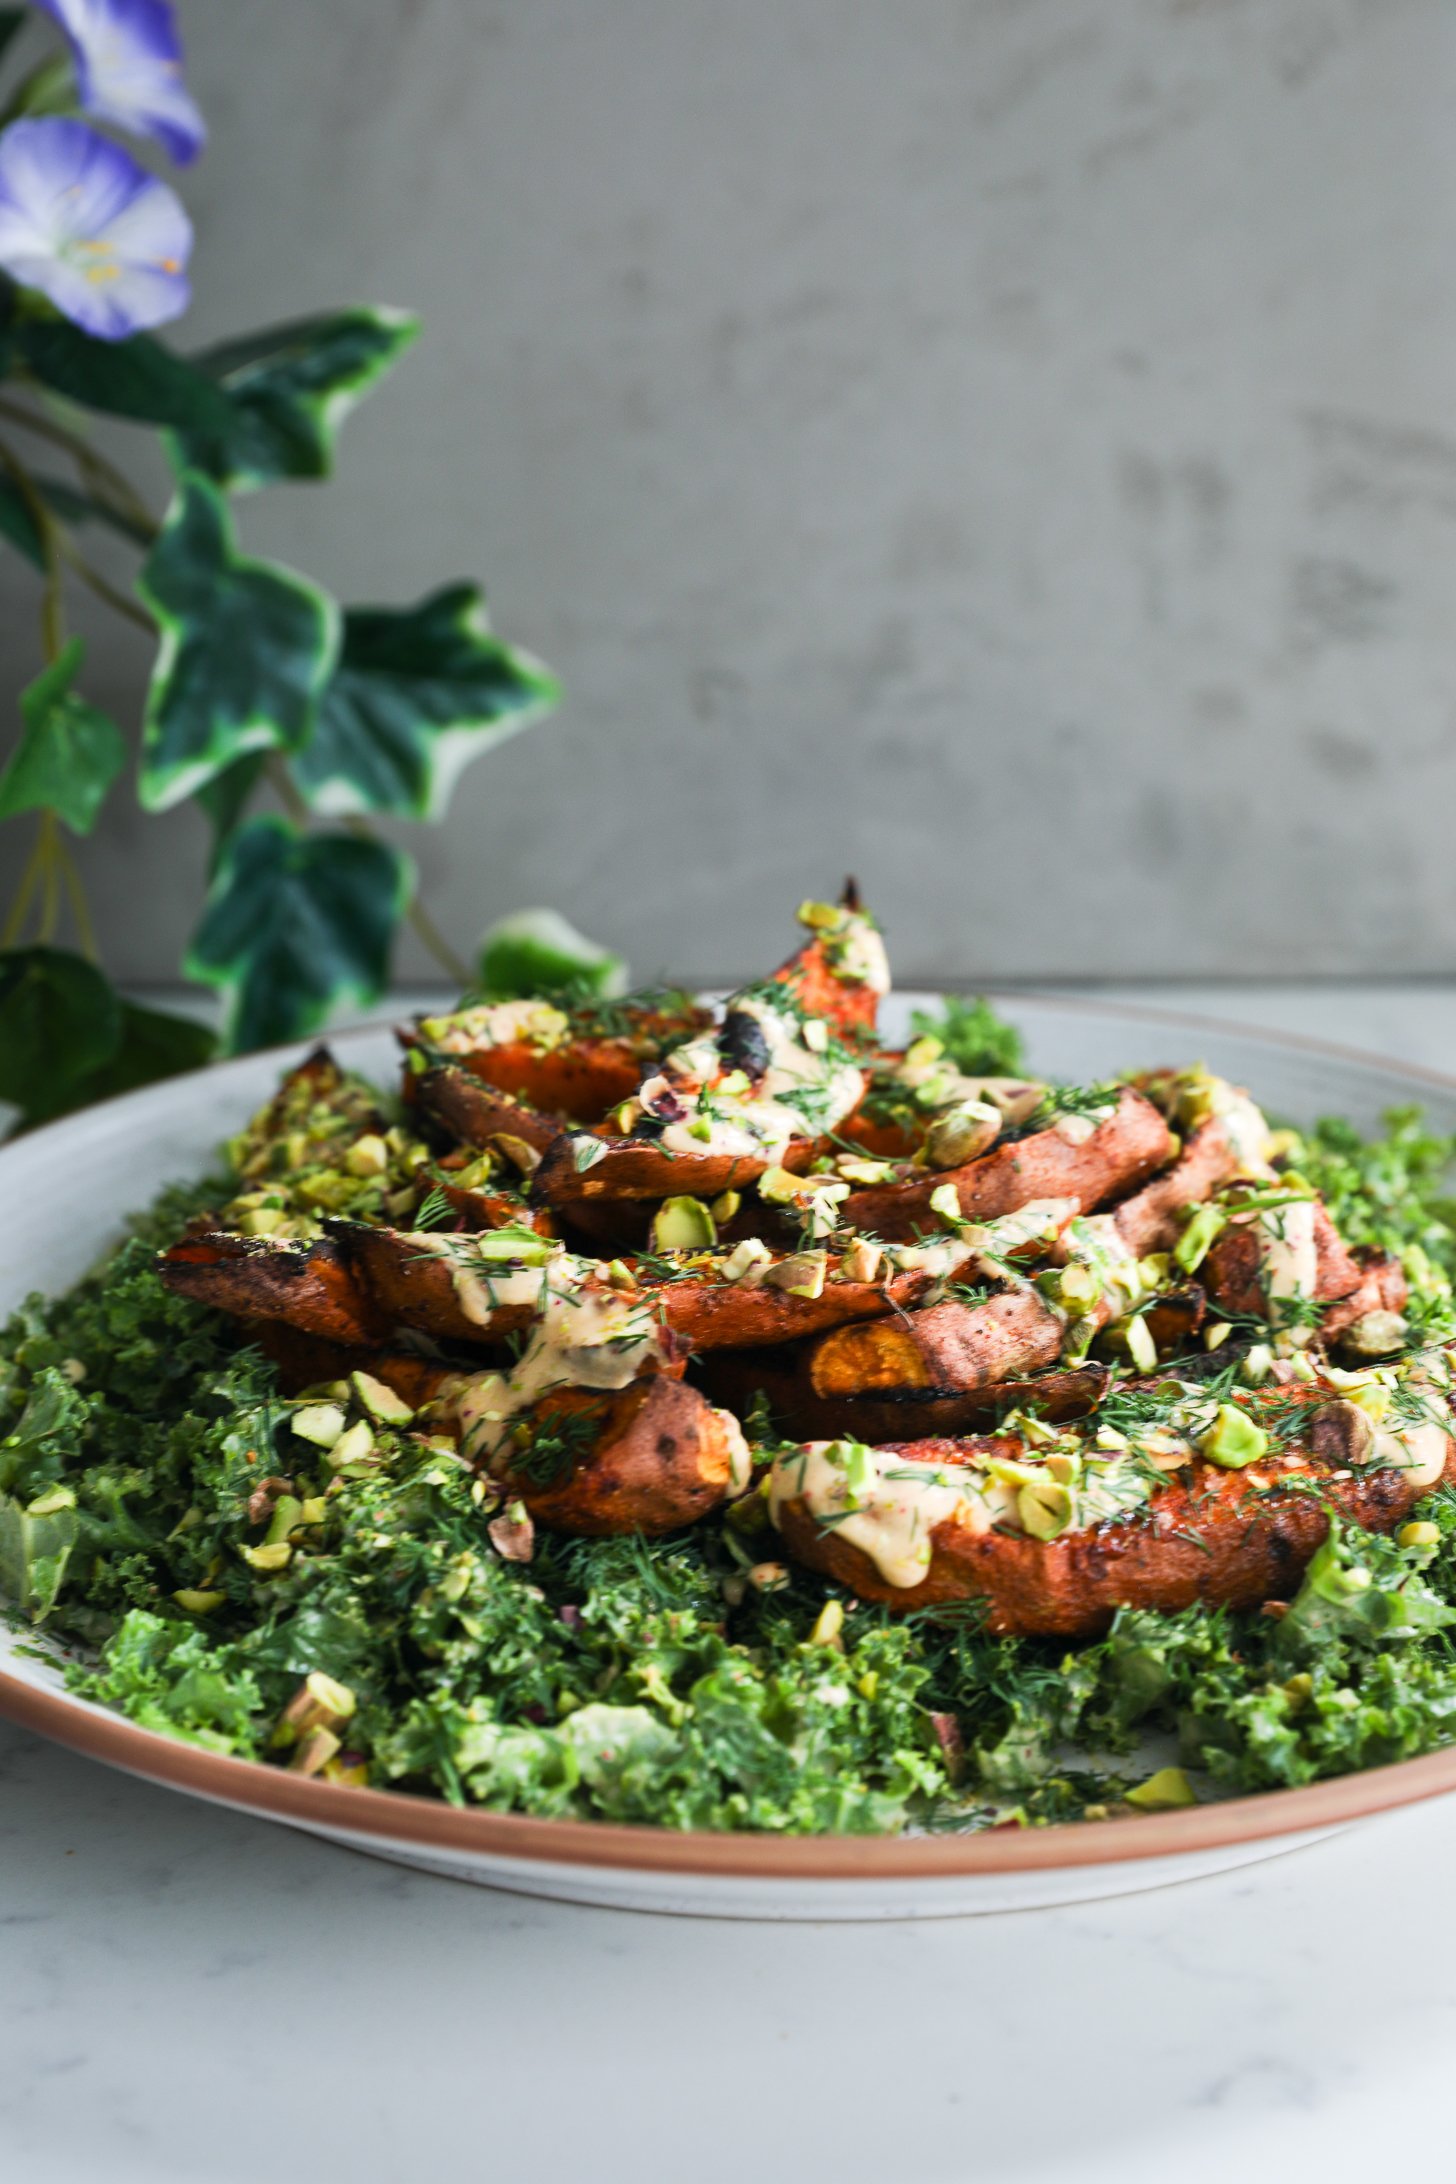 A close up perspective image of a plate of chopped kale topped with spicy roasted sweet potatoes doused in a creamy dressing and covered in chopped pistachios.